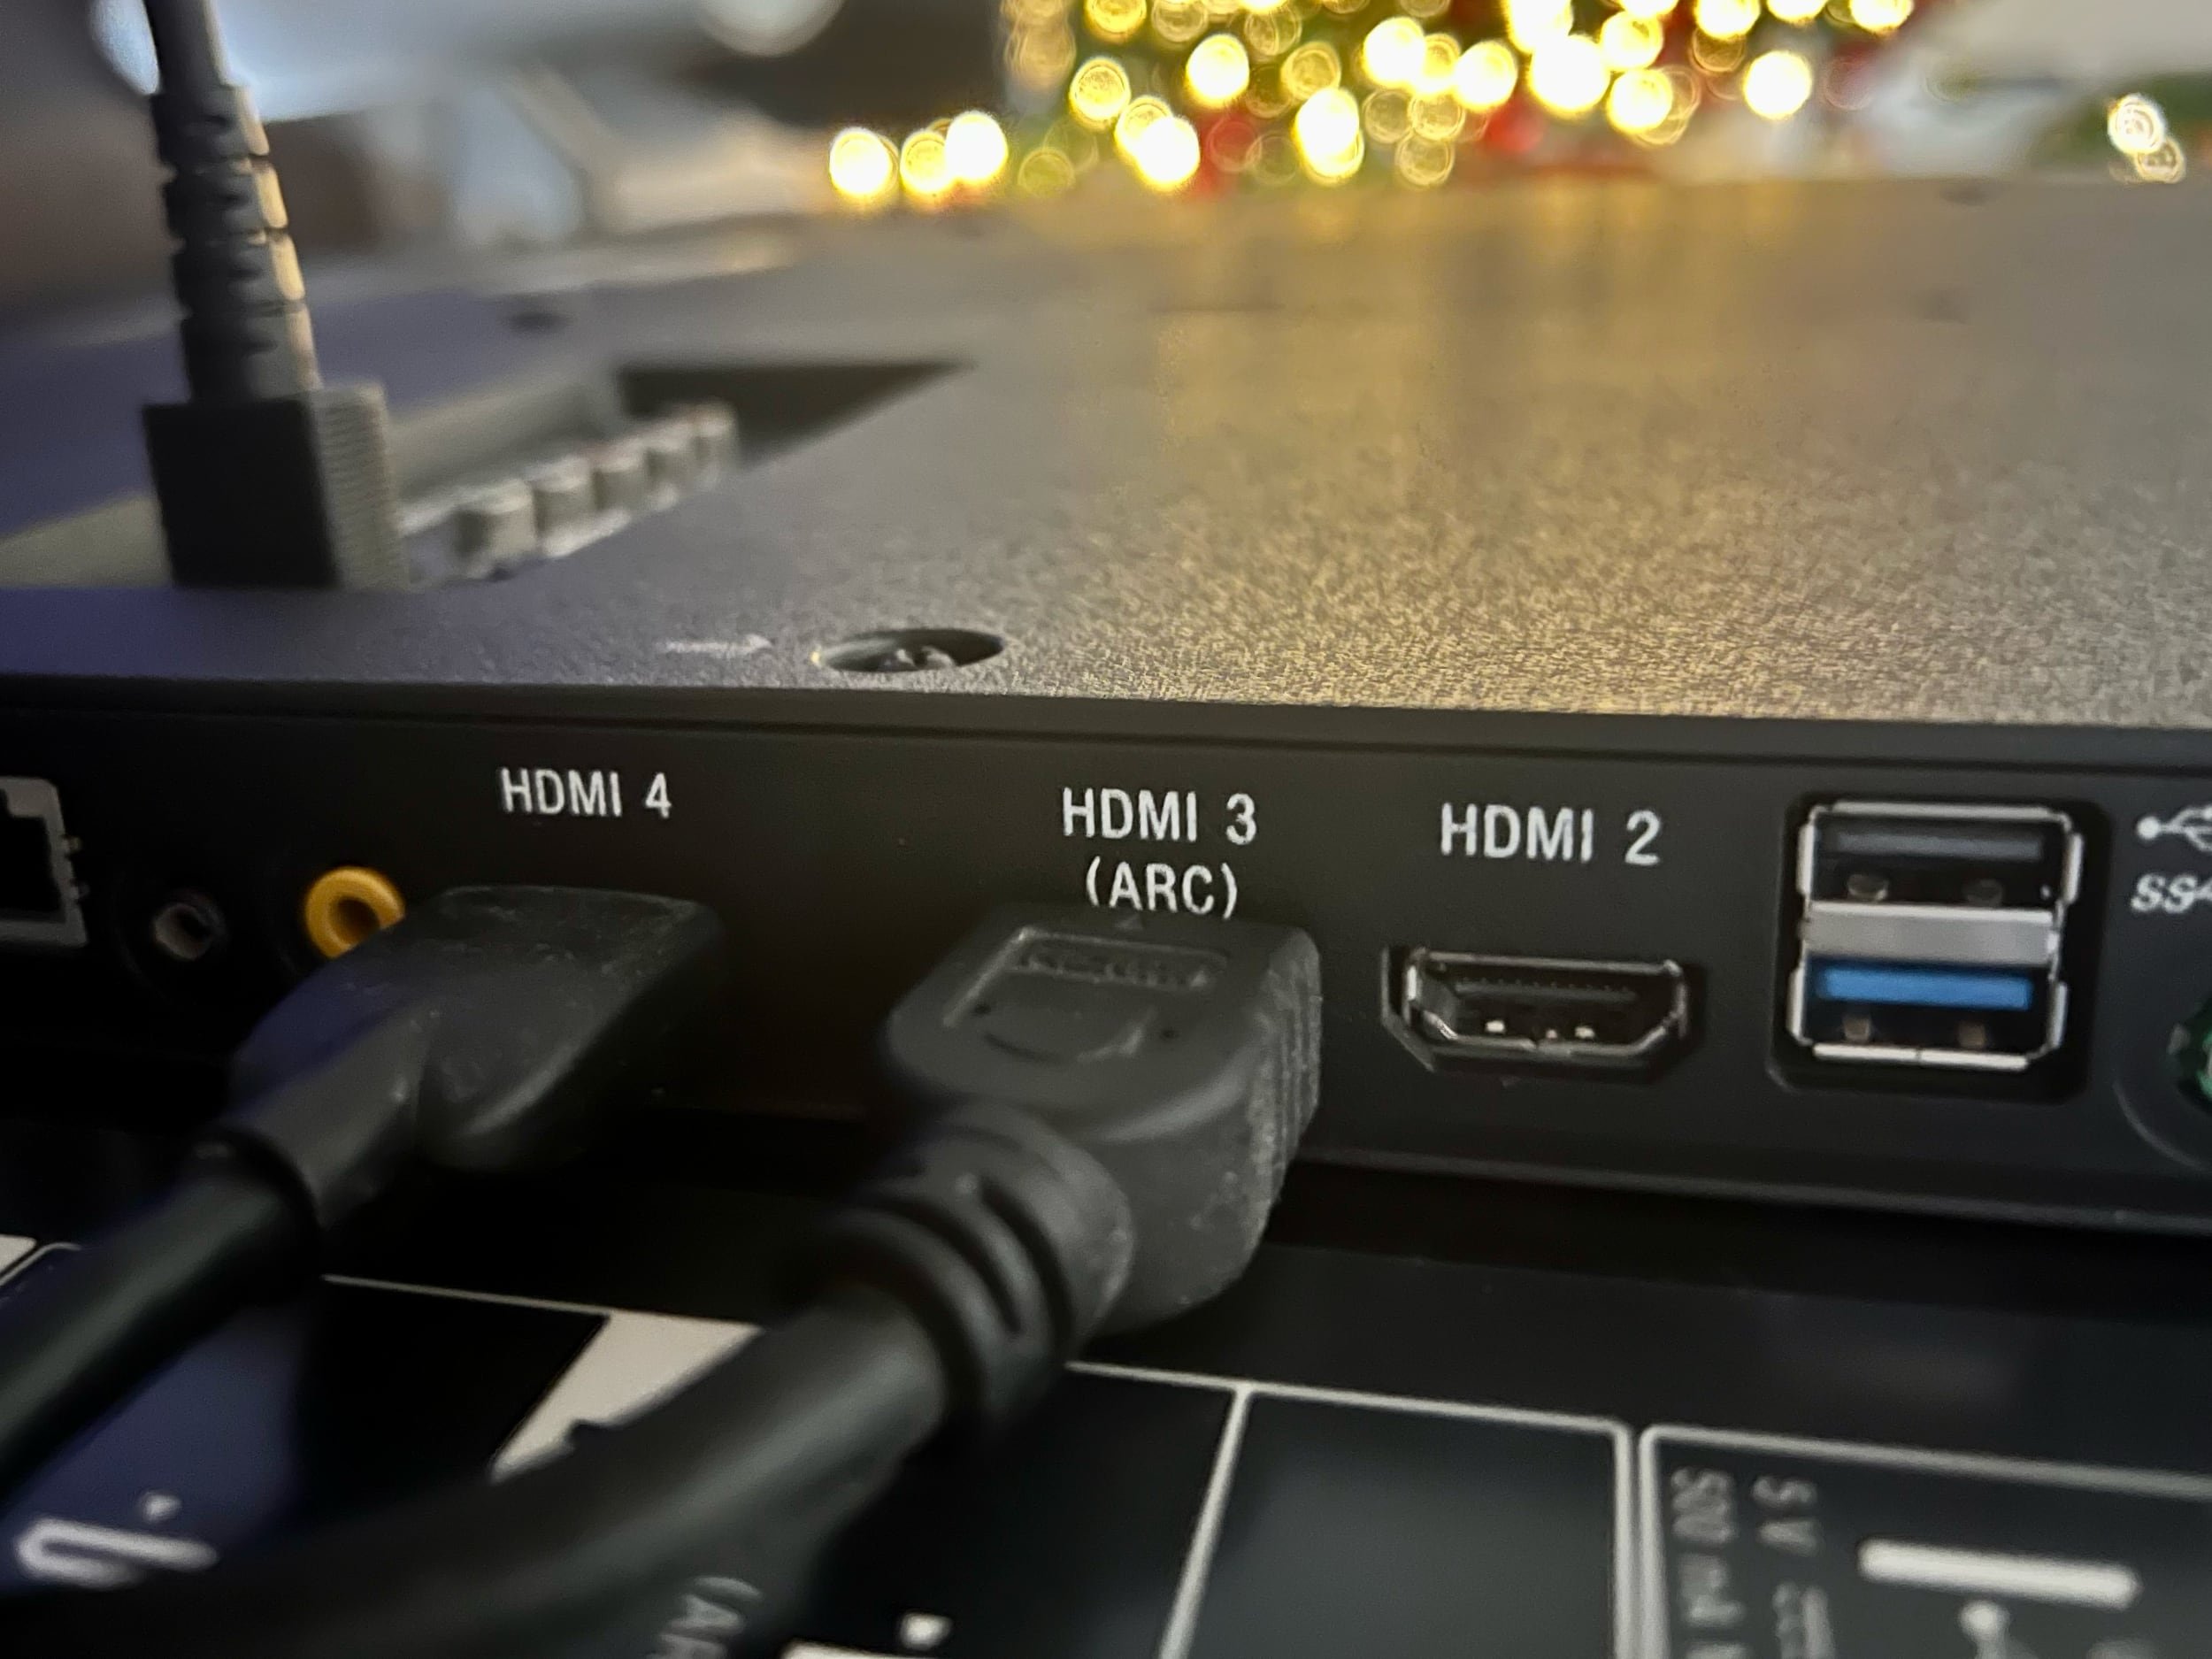 Do You Need HDMI eARC For Dolby Atmos? –